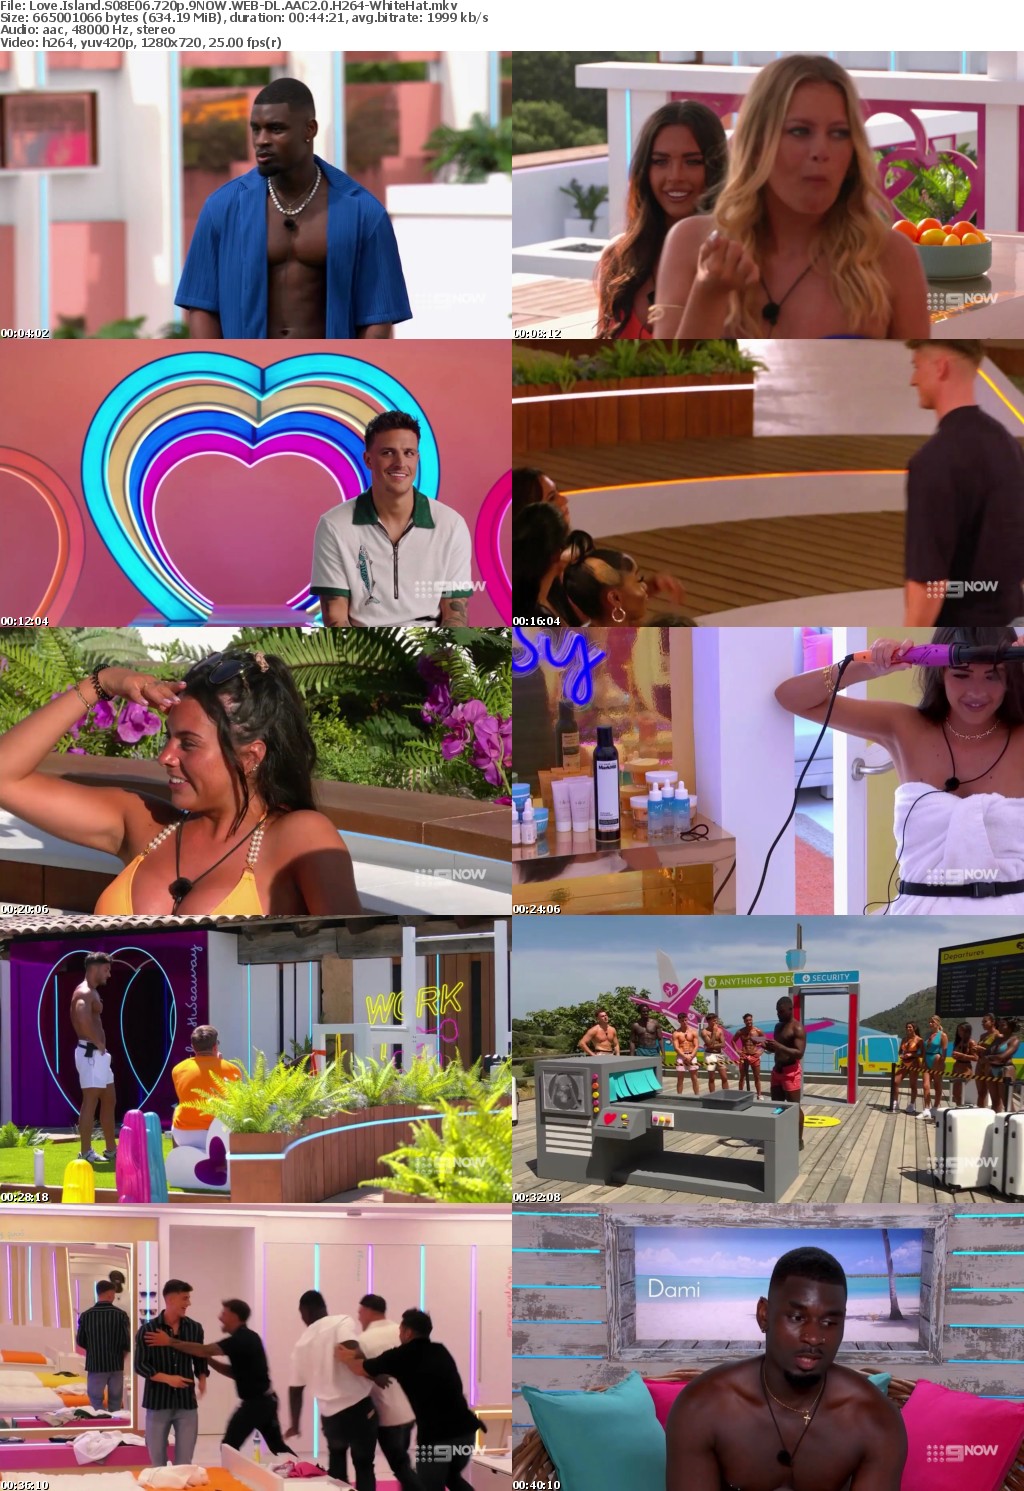 Love Island S08E06 720p 9NOW WEB-DL AAC2 0 H264-WhiteHat